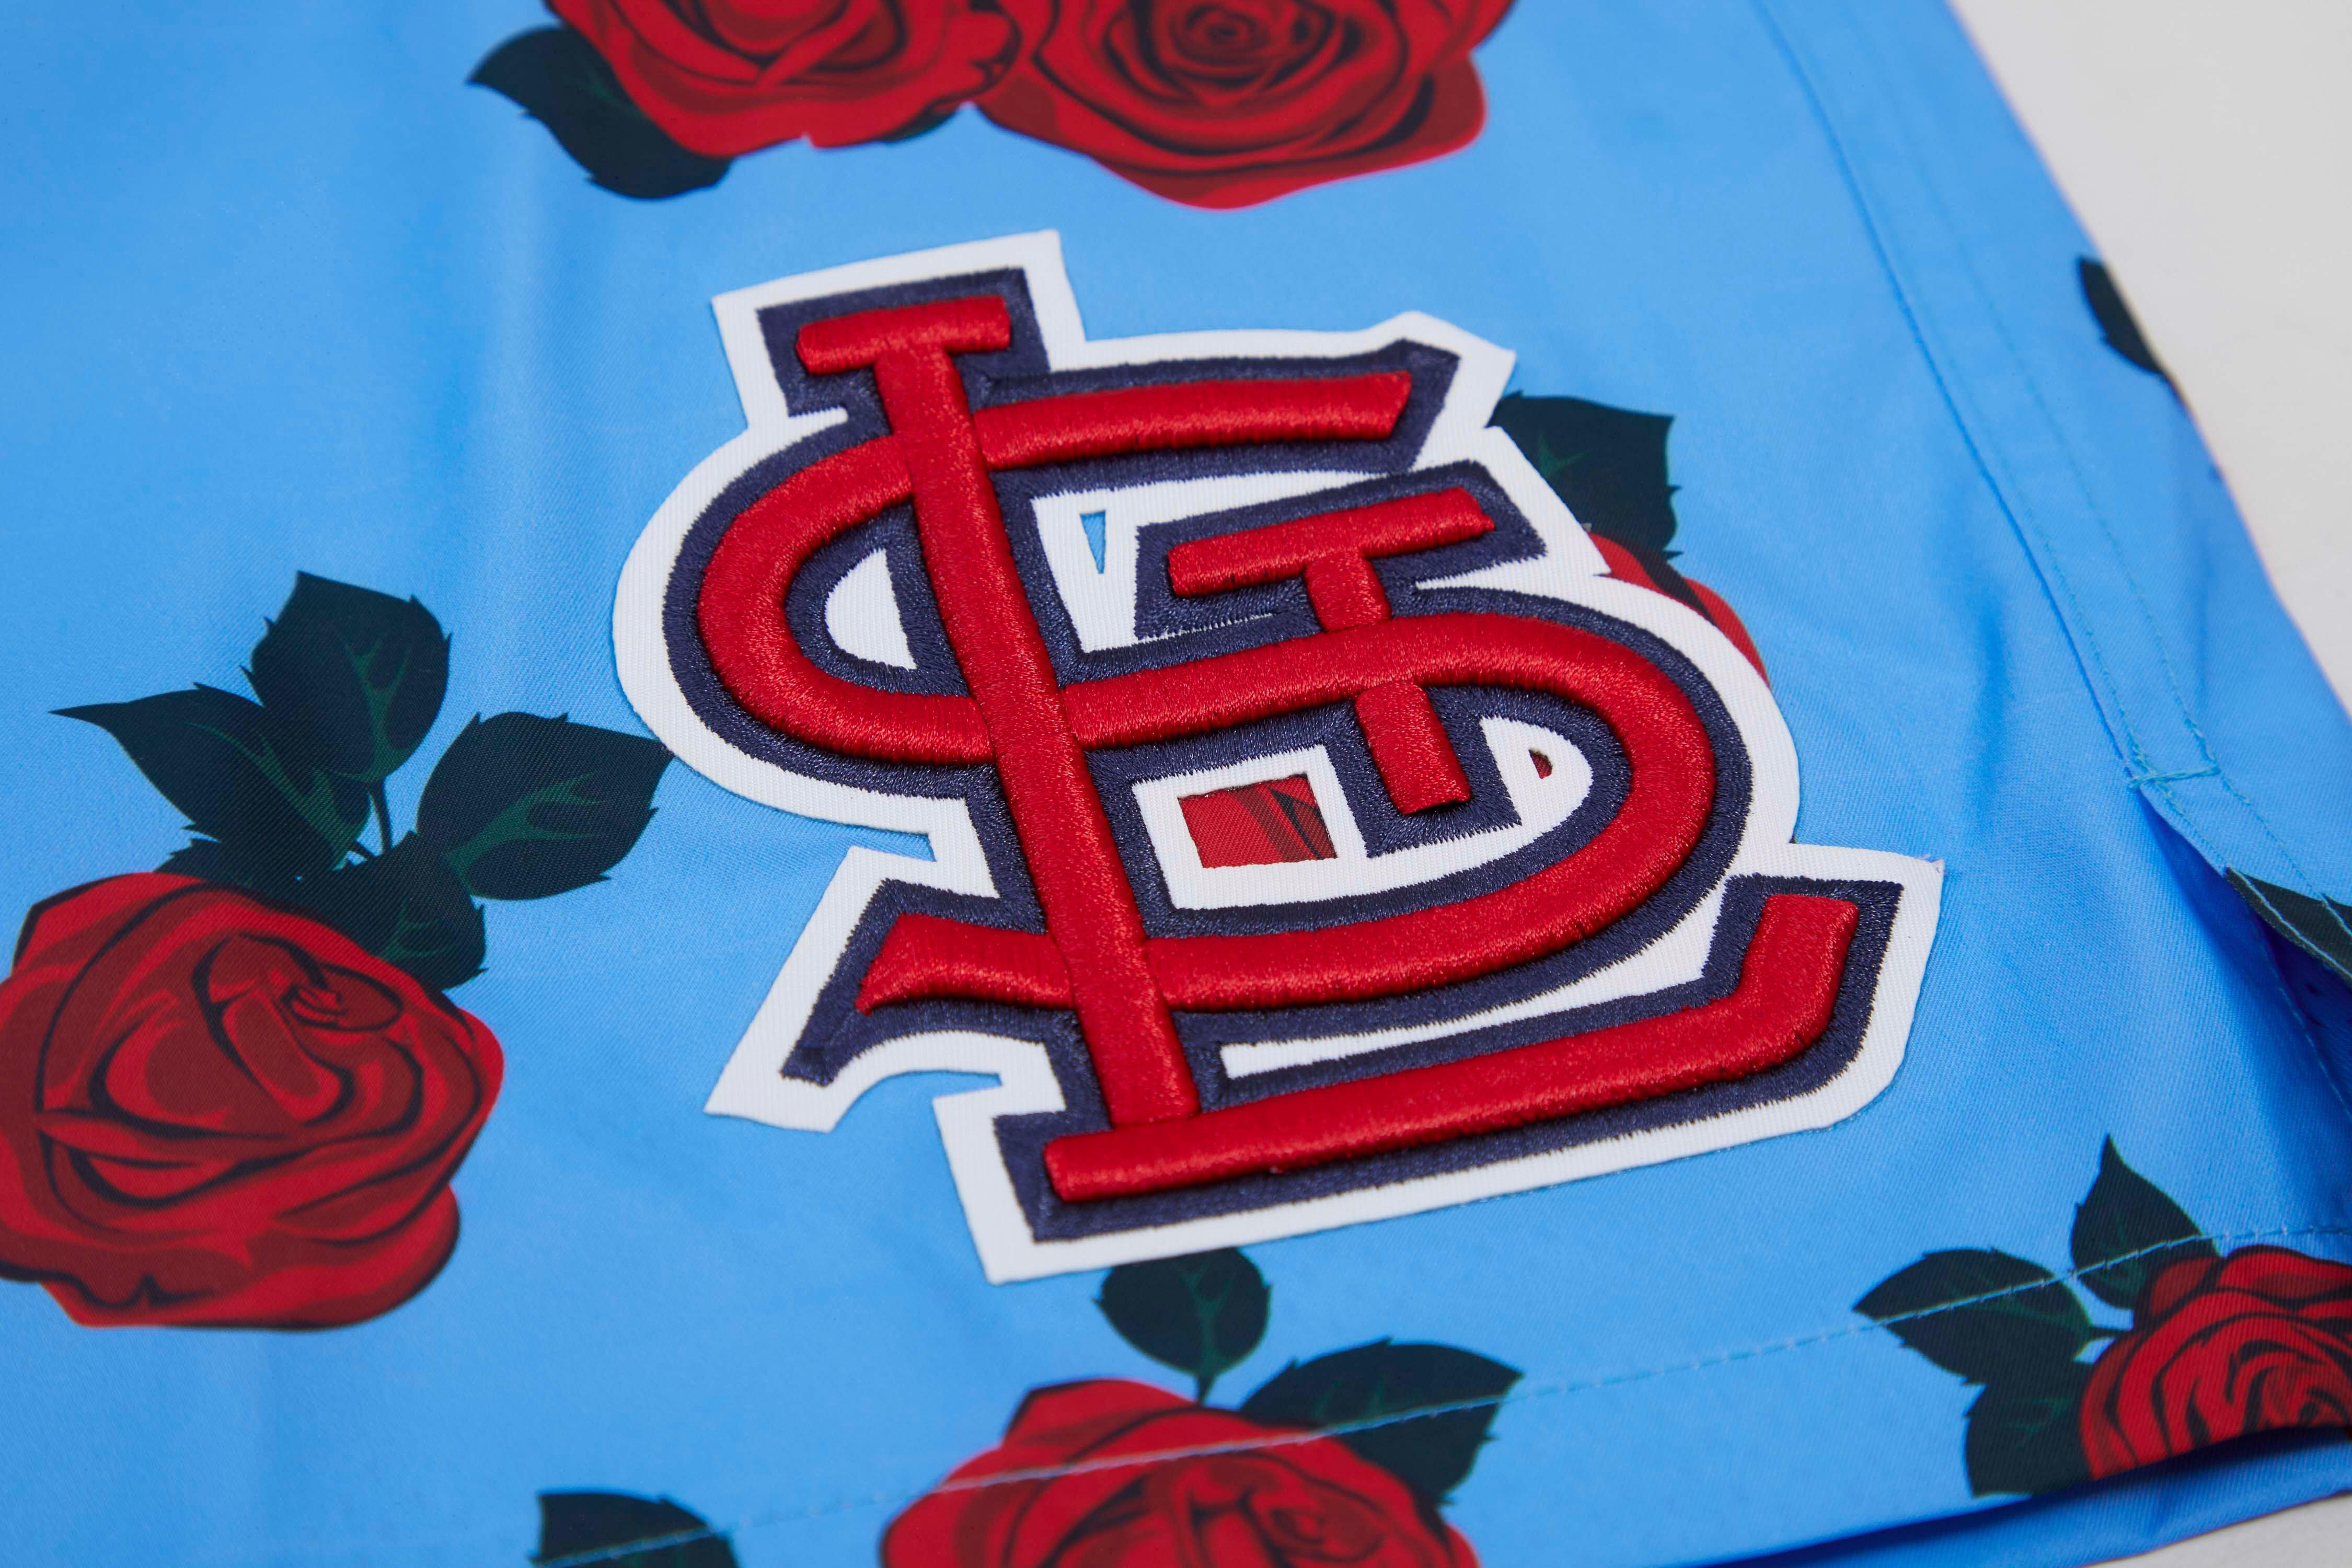 STL Cardinals Hawaiian Shirt Flower Pattern St Louis Cardinals Gift -  Personalized Gifts: Family, Sports, Occasions, Trending